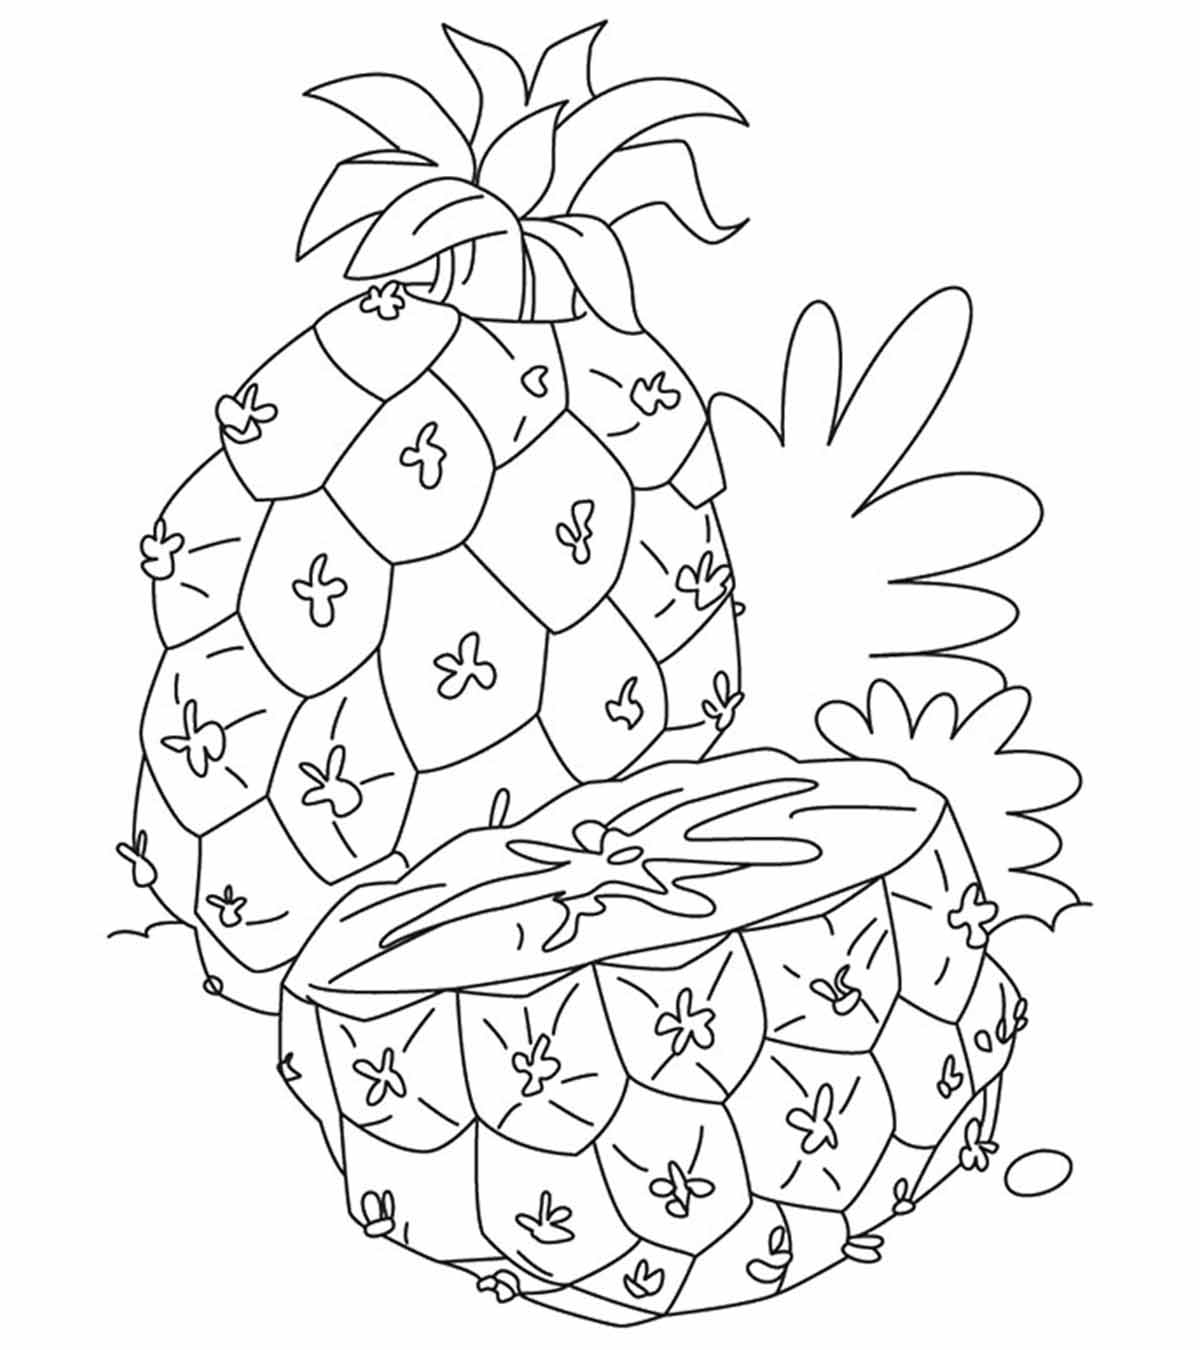 10 Best Pineapple Coloring Pages For Toddlers